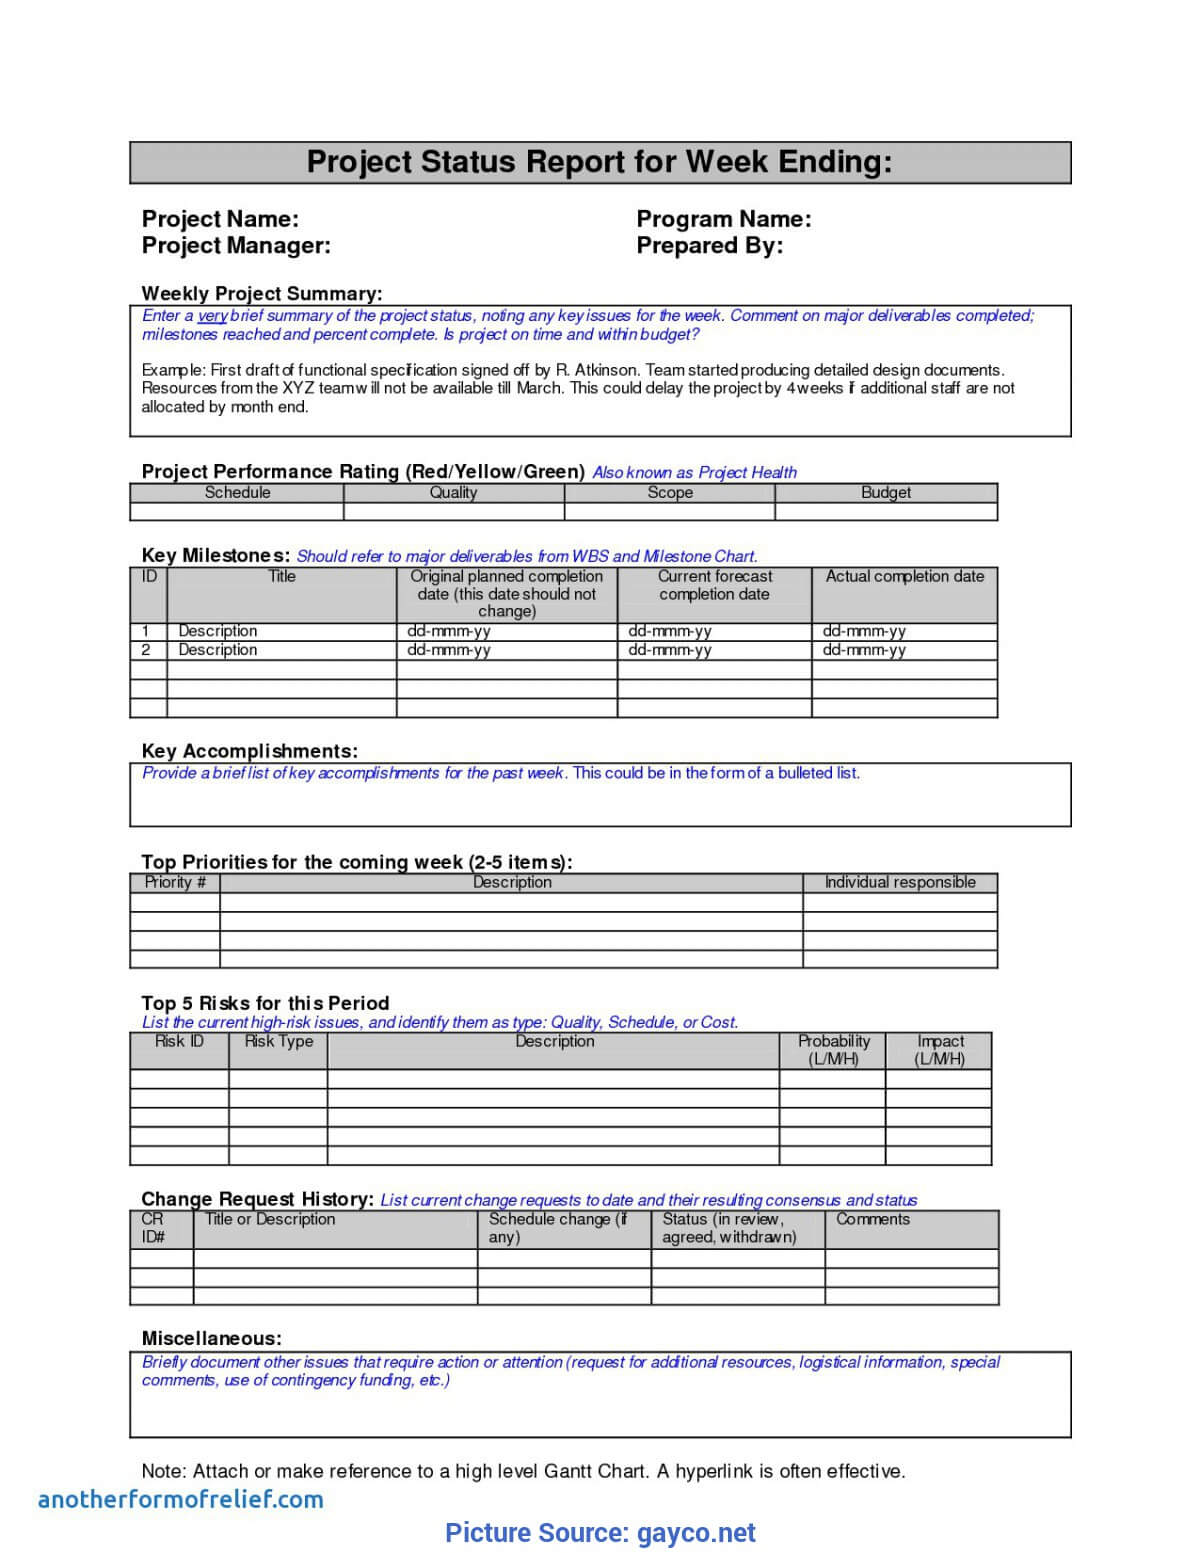 Prince2 Lessons Learnt Log Template | Free Resum – Ota Tech Throughout Prince2 Lessons Learned Report Template